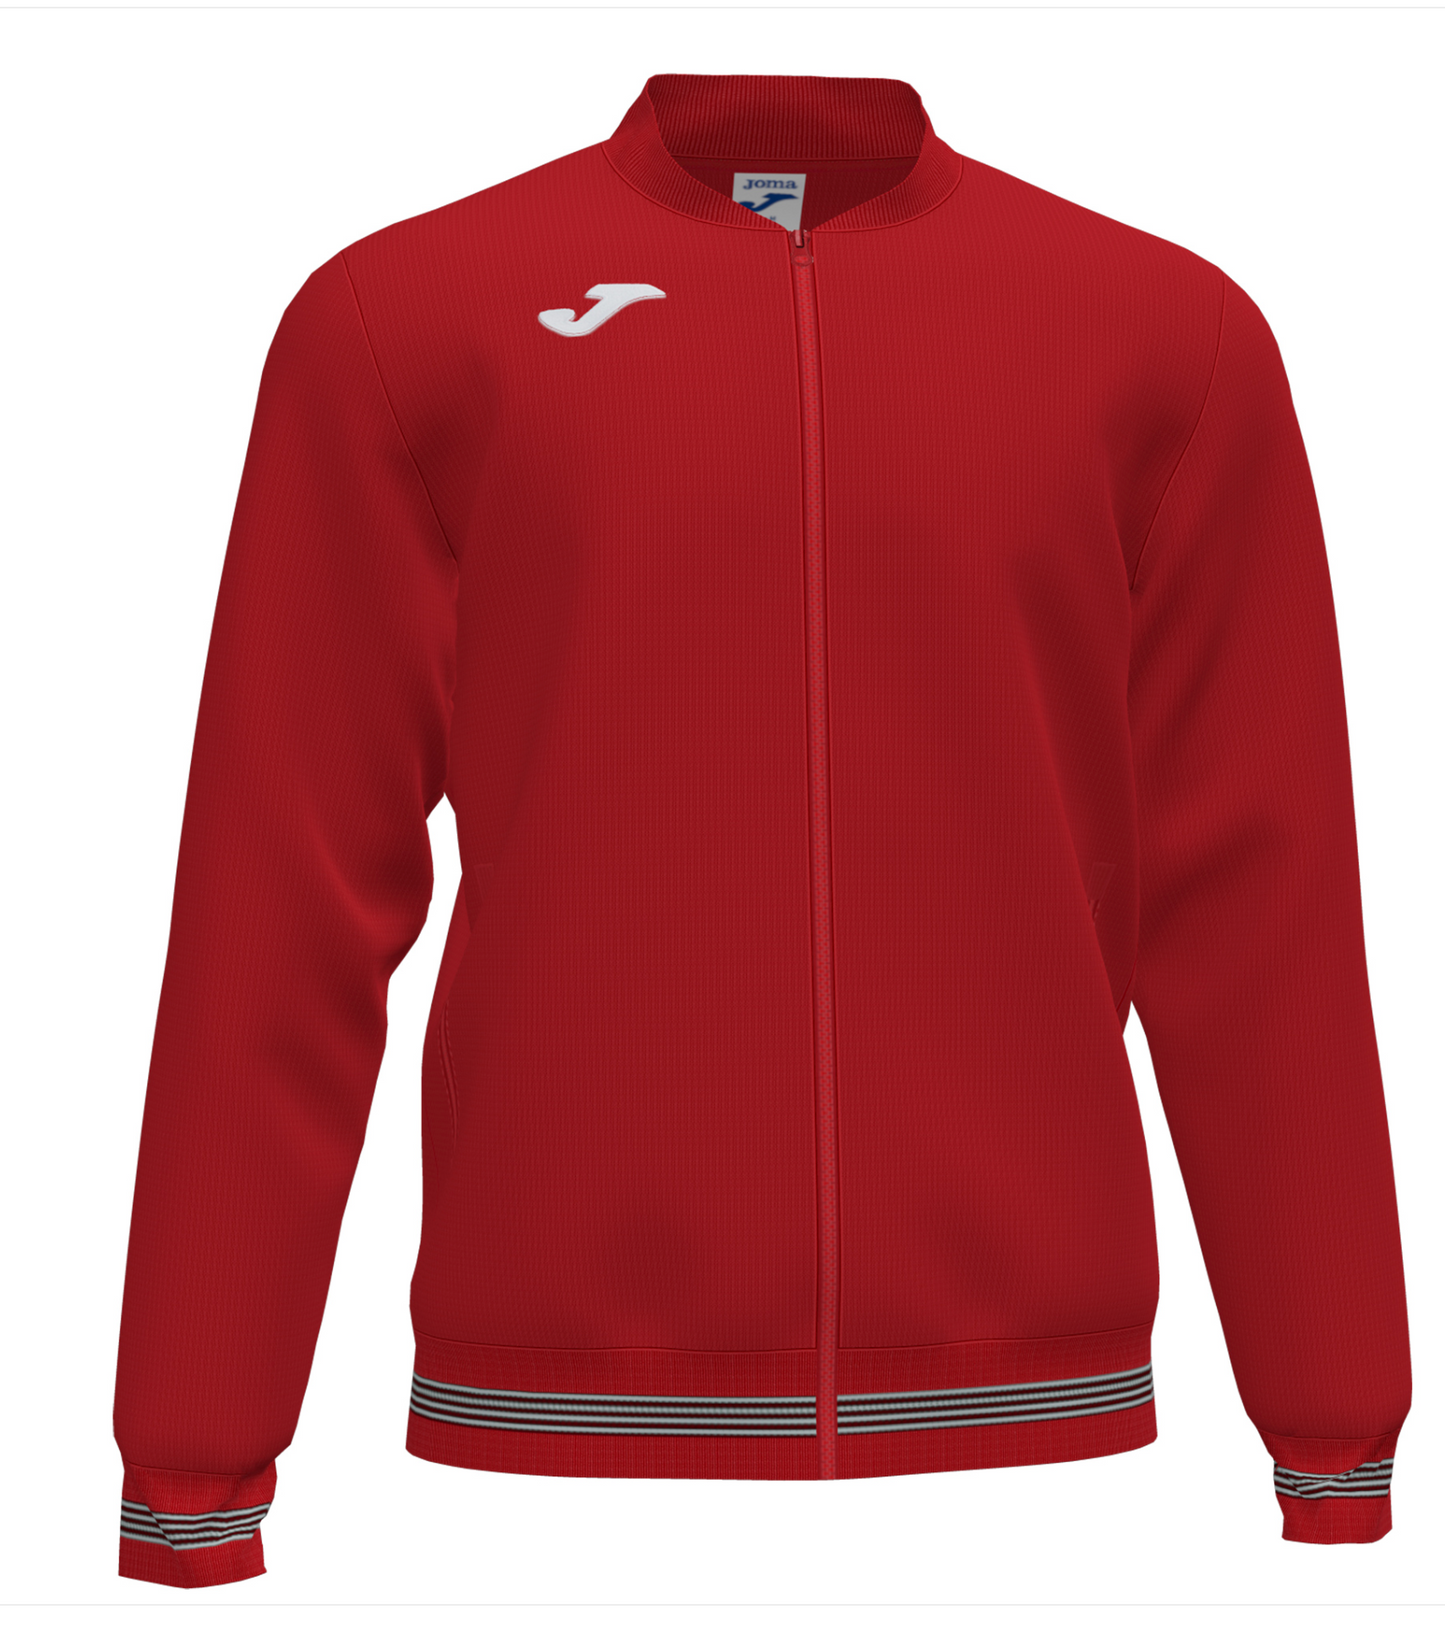 Joma Campus III Jacket-Red/White